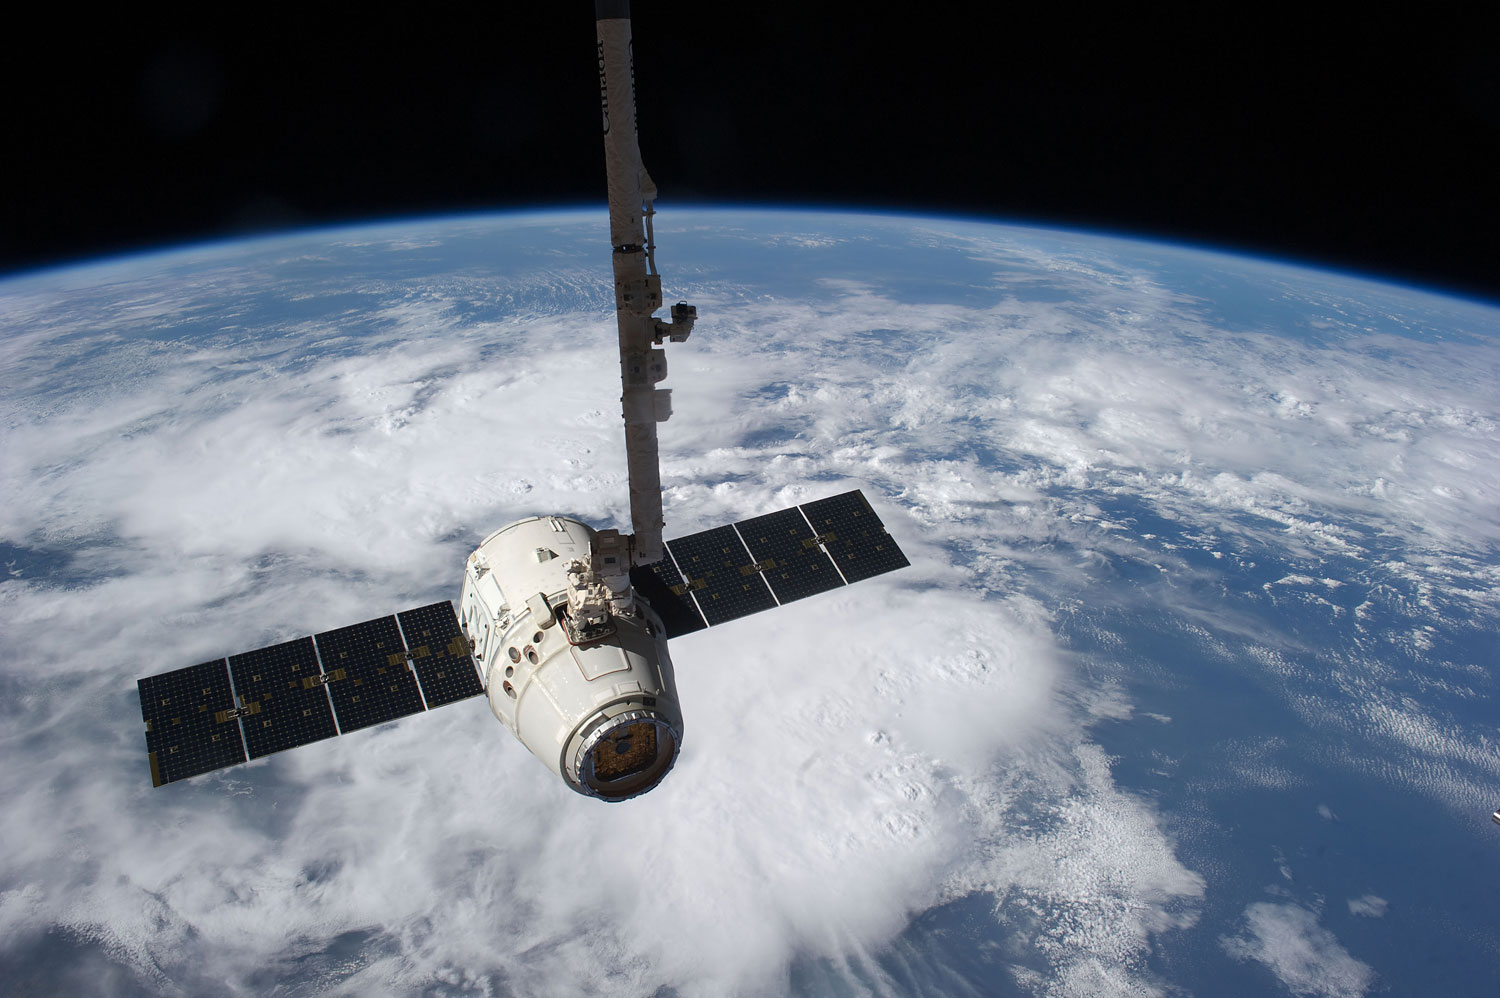 This image provided by NASA shows the SpaceX Dragon cargo craft just prior to being released by the International Space Station's robotic arm on May 31, 2012 (NASA—AP)